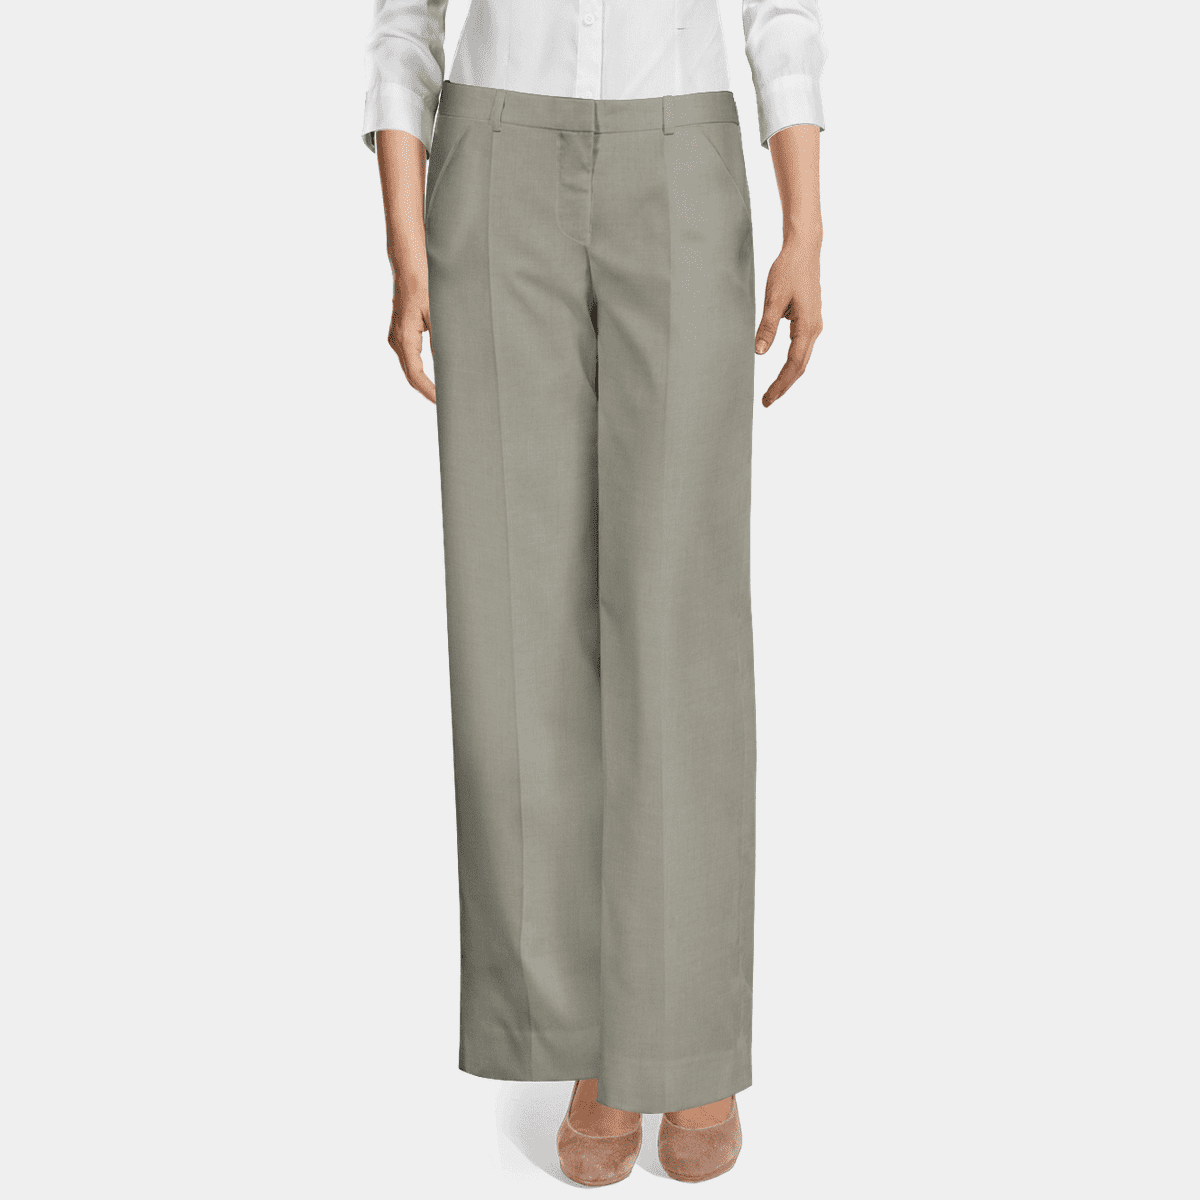 Oyster grey flat-front stretch year-round Wide leg Pants